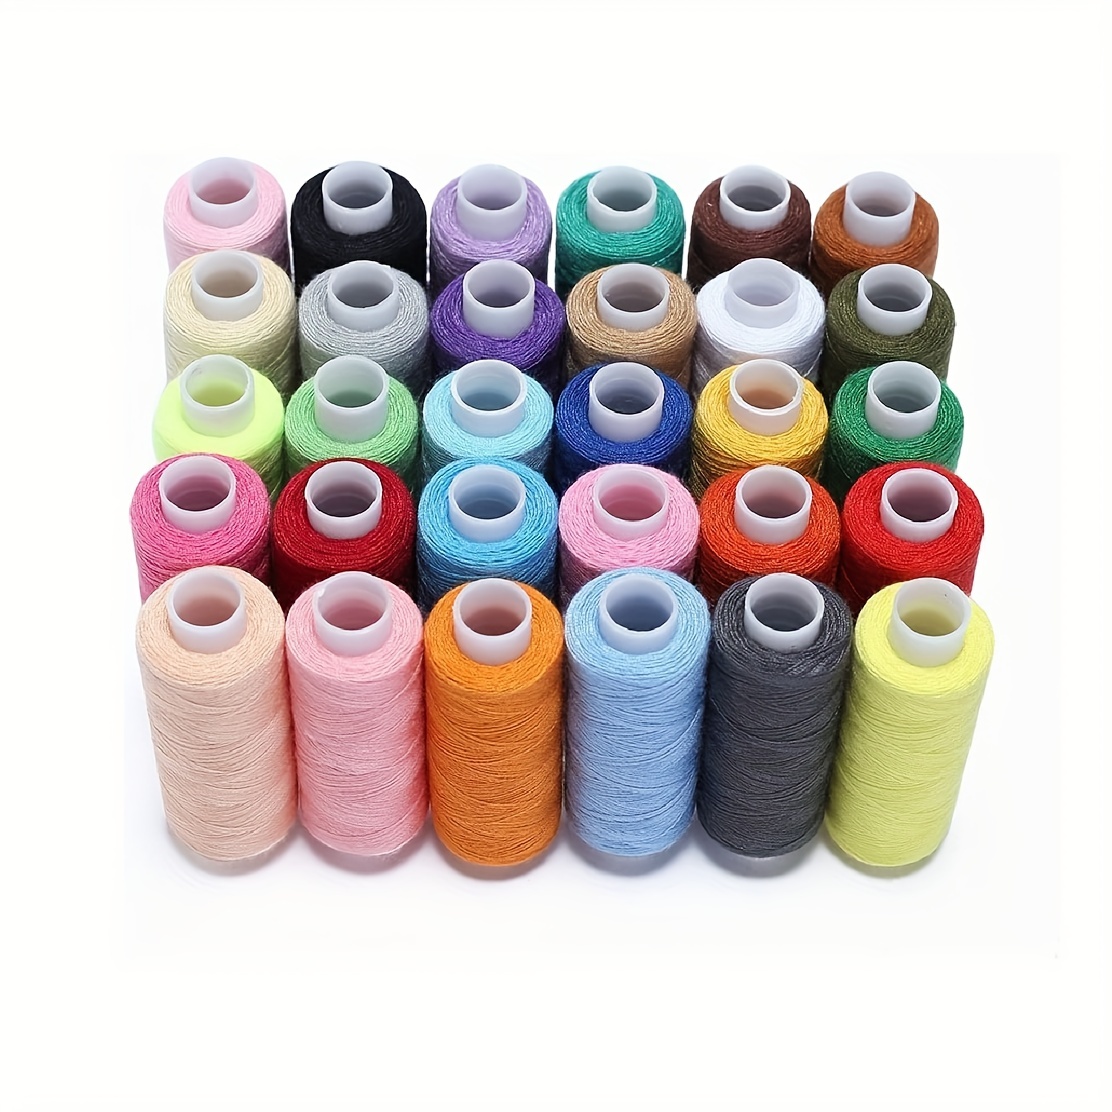 Sewing Threads Kits, 36 Colors Polyester Thread Sewing Thread, 400 Yards per Spools for Hand Sewing,Travel and DIY.